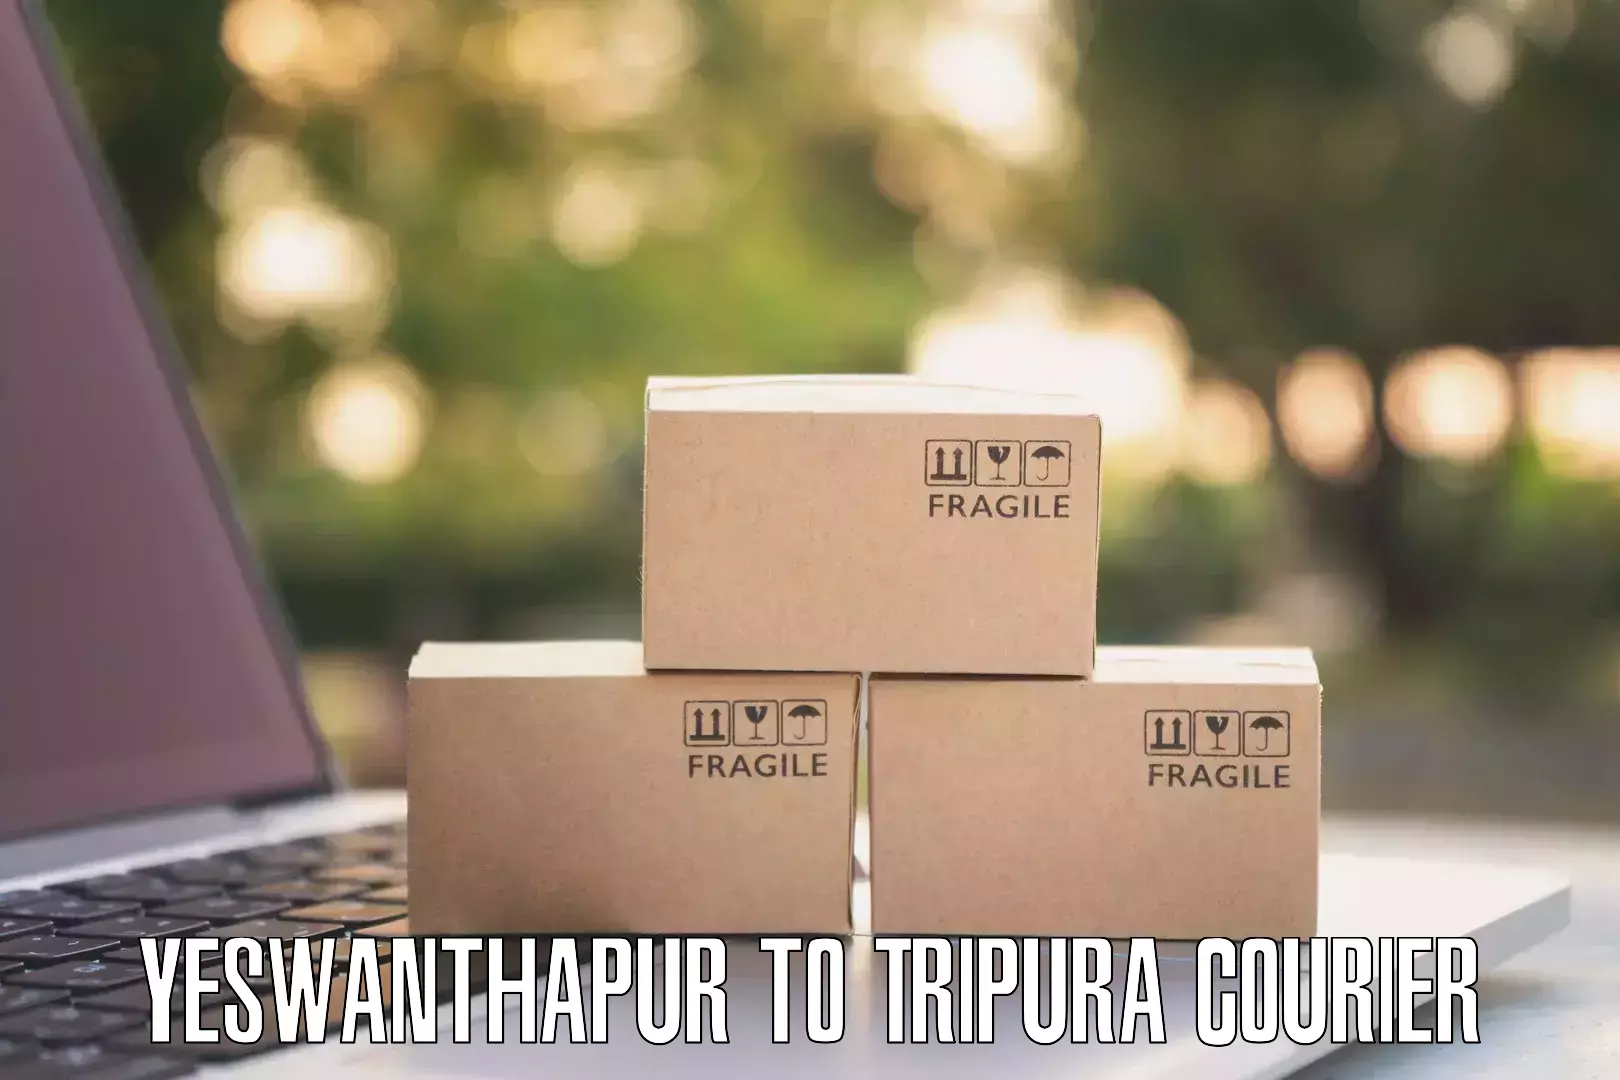 Express courier capabilities Yeswanthapur to Bishalgarh